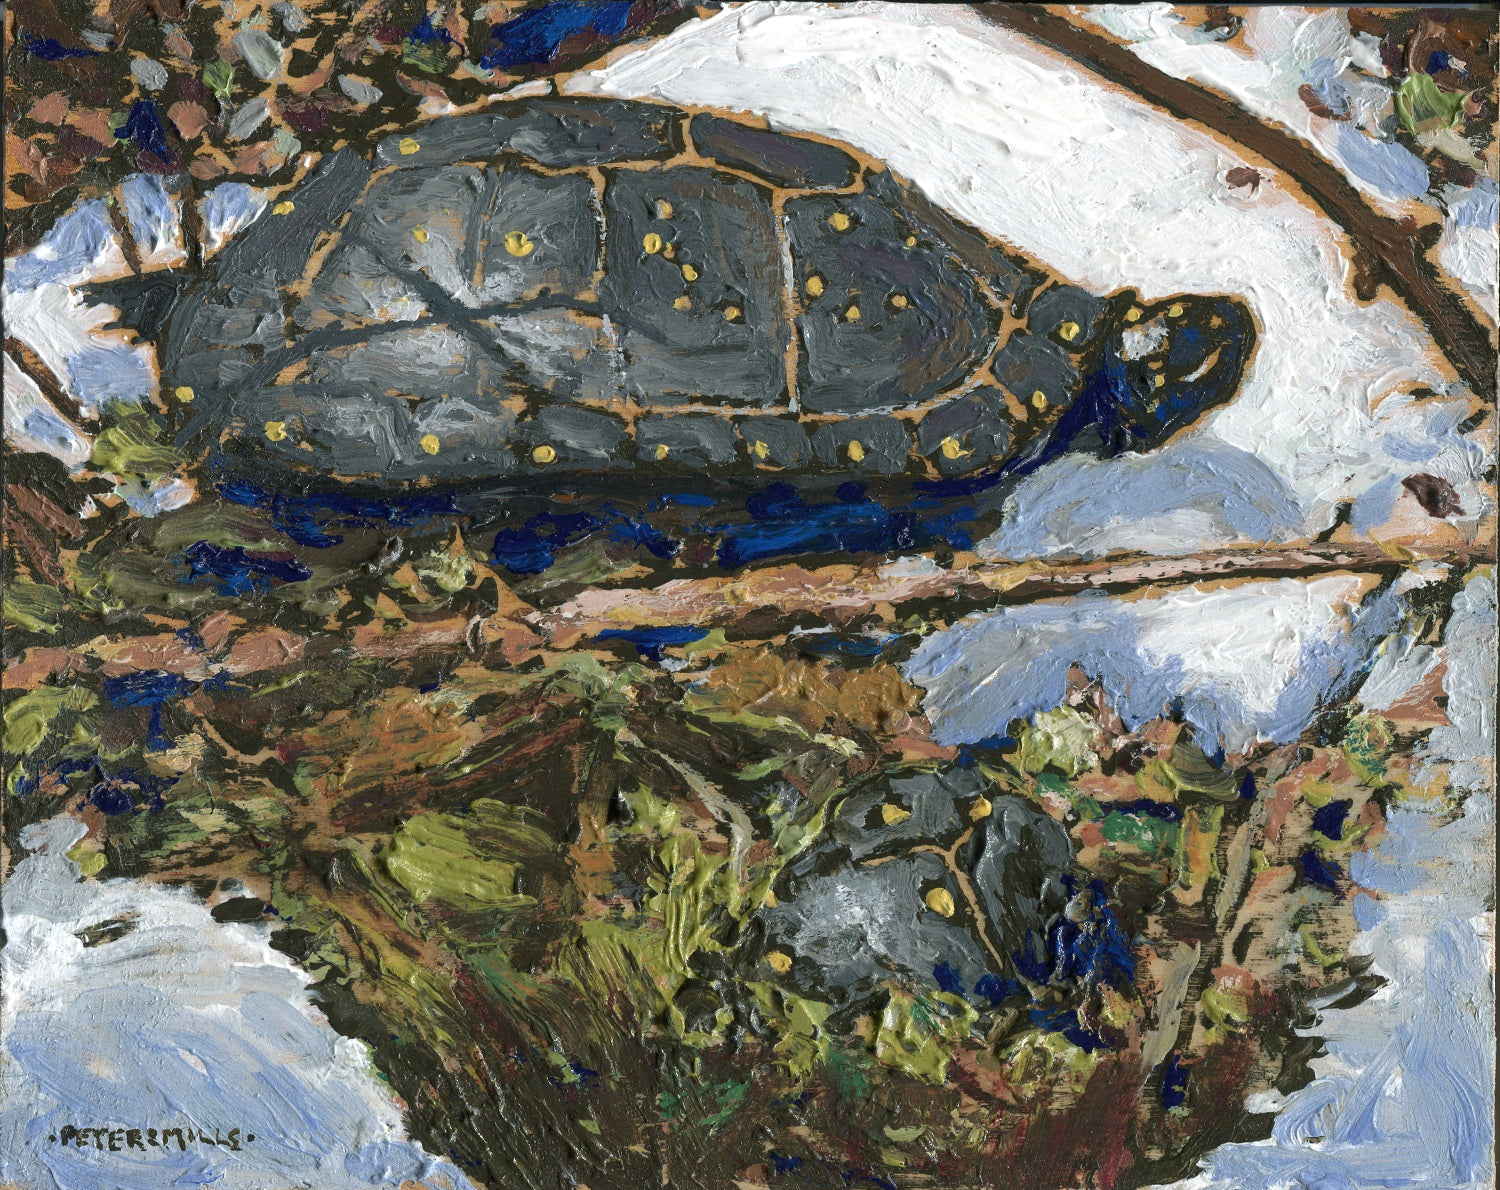 Spotted Turtles Basking at Thaw